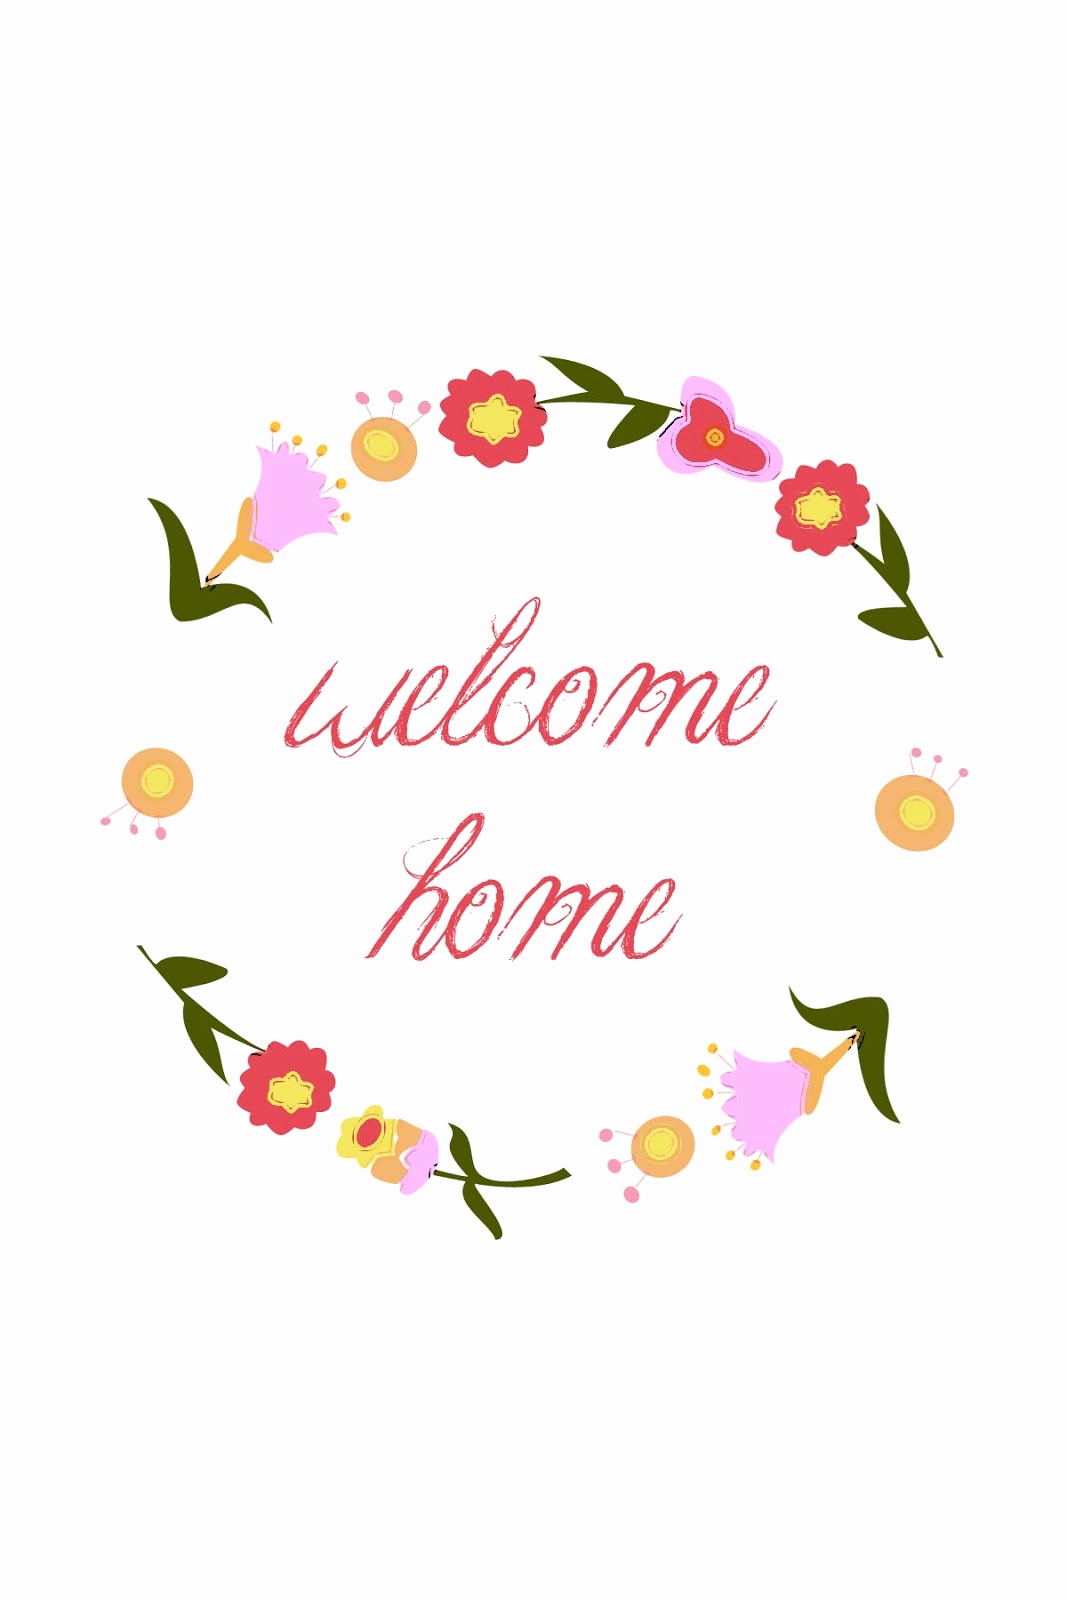 Free Printable Welcome Home Cards - Tduck.ca - Free Printable Welcome Cards